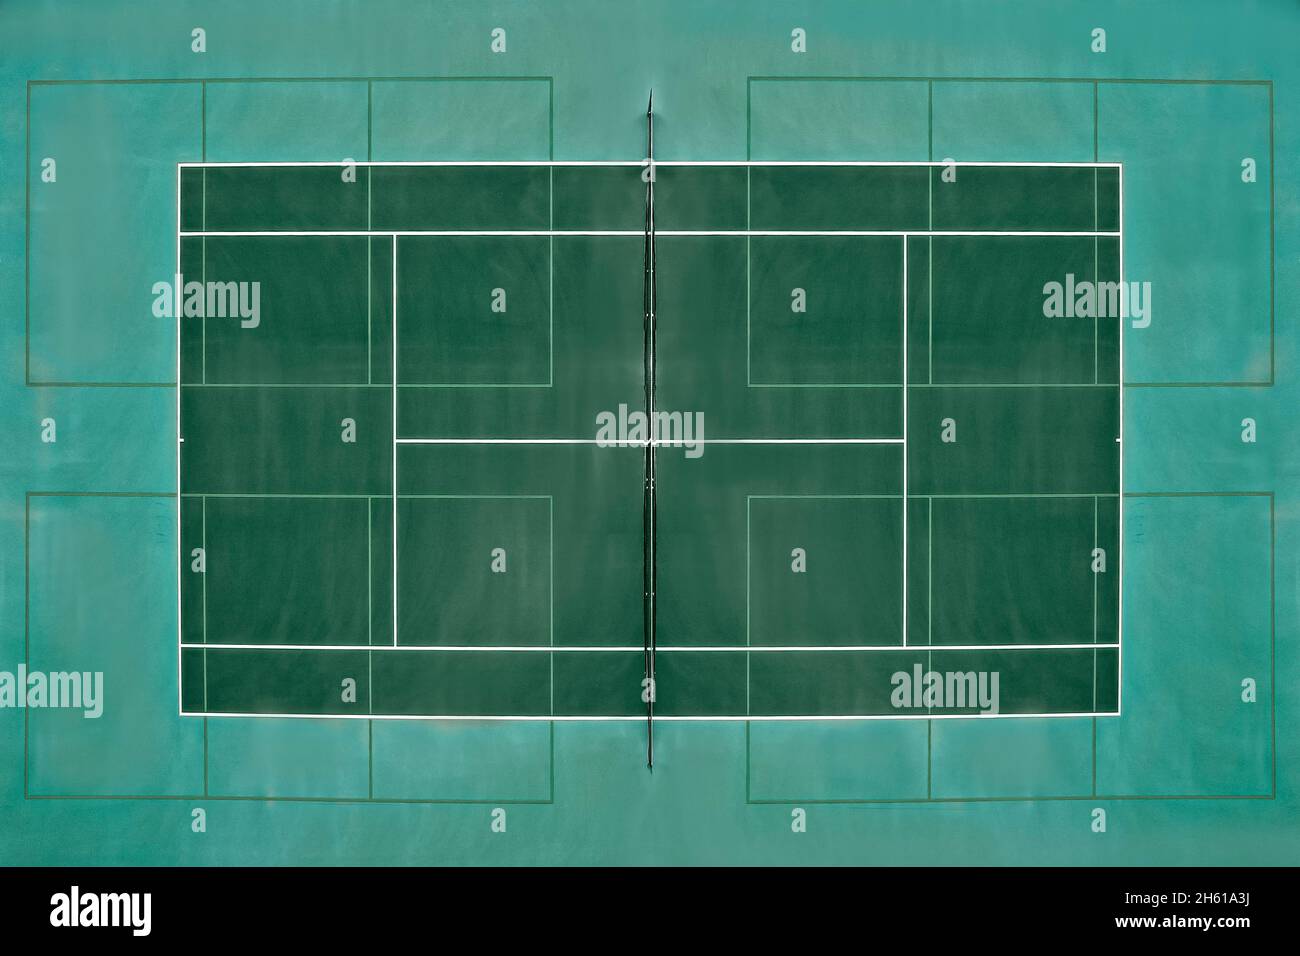 Aerial top view tennis court Stock Photo